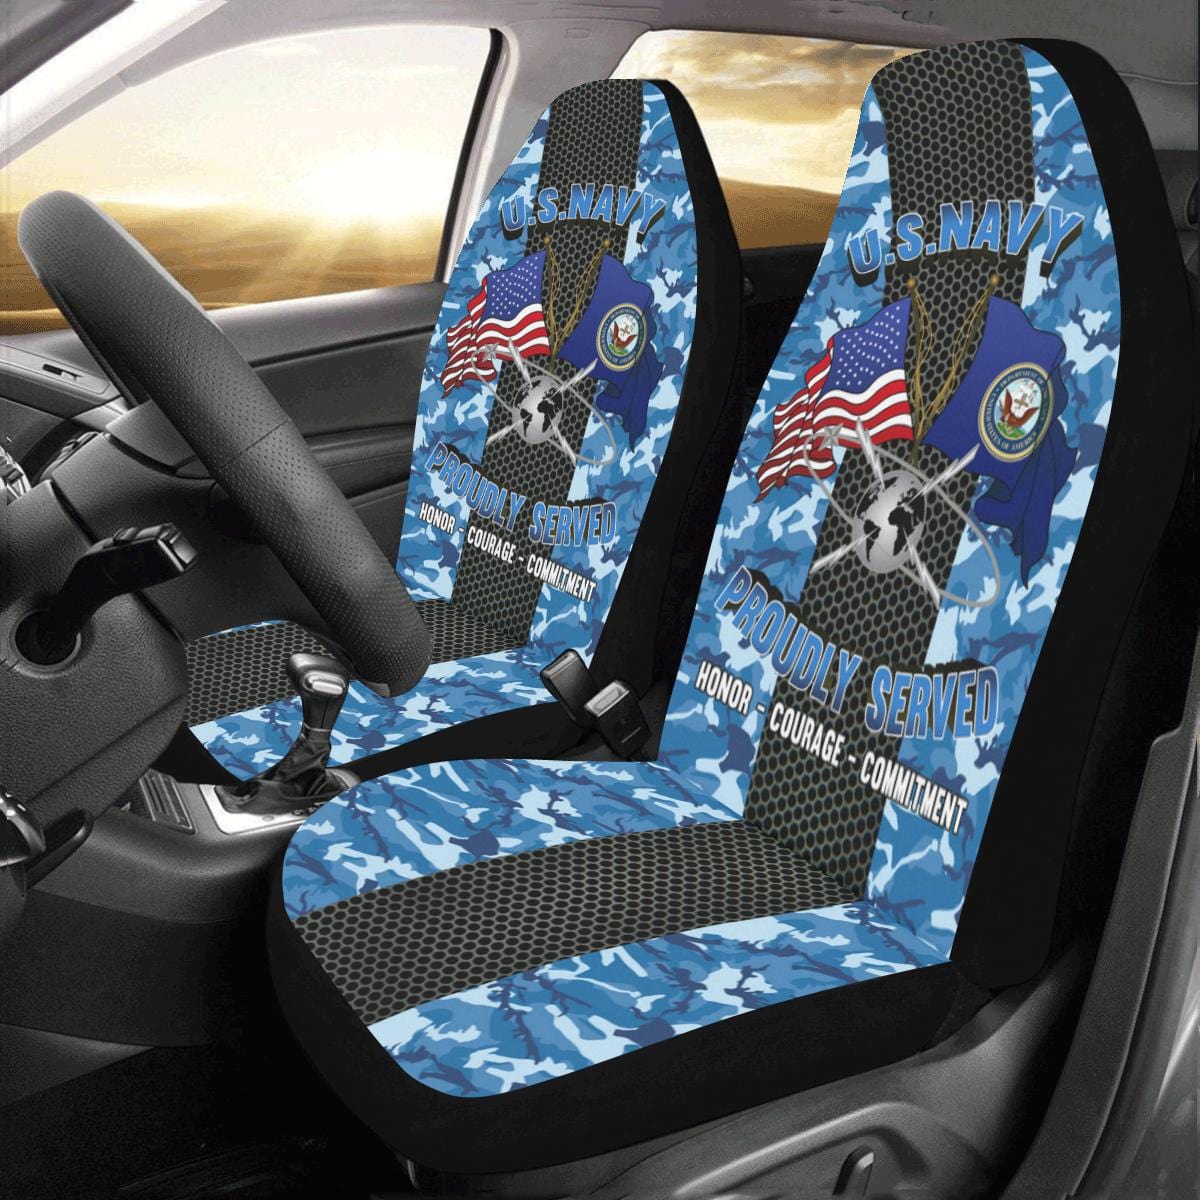 Navy Mass Communications Specialist Navy MC Car Seat Covers (Set of 2)-SeatCovers-Navy-Rate-Veterans Nation